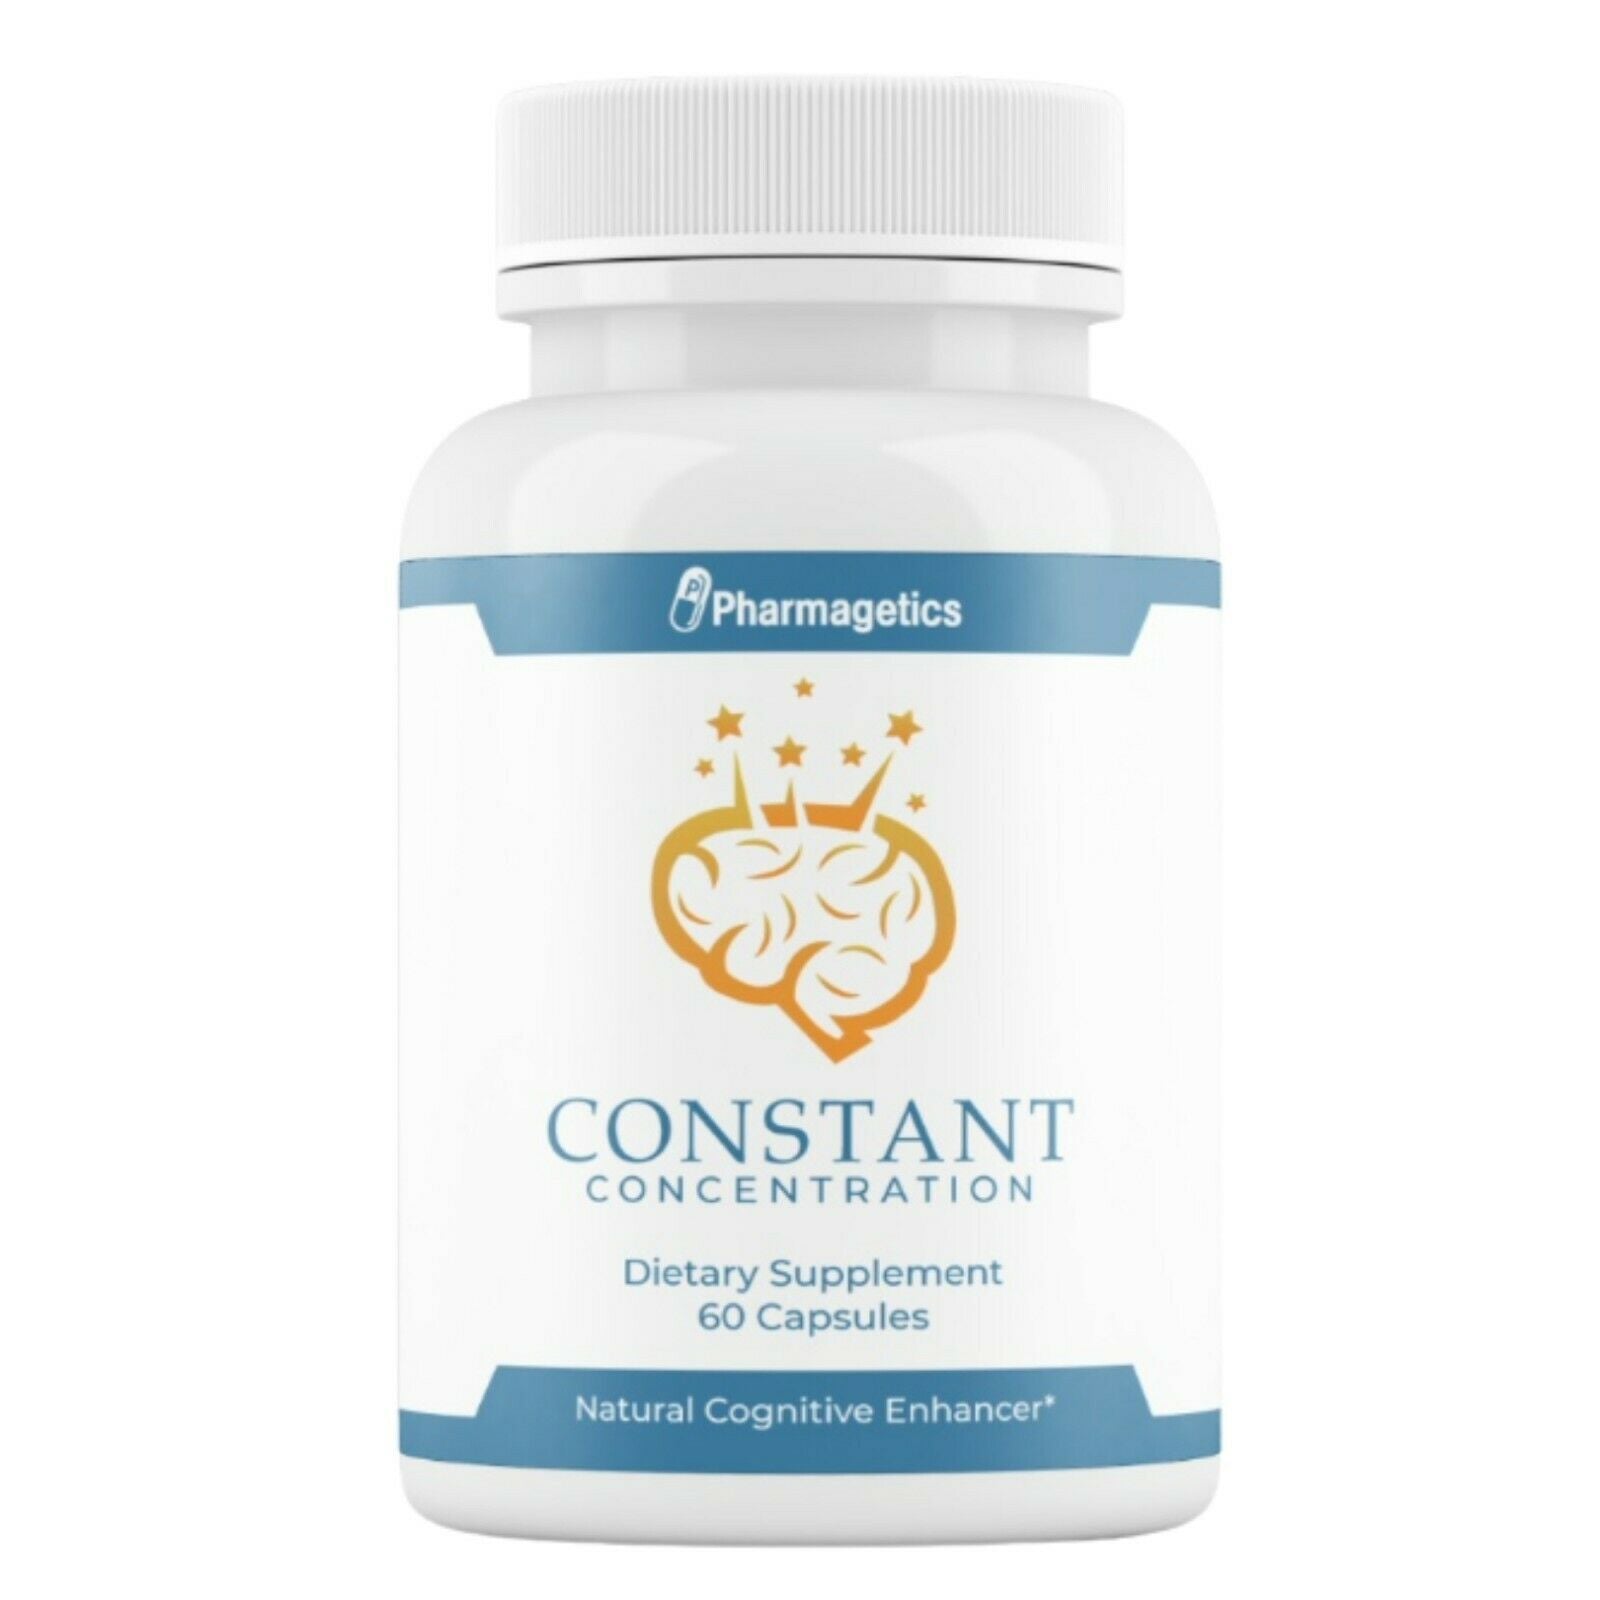 Constant Concentration 60 Capsules